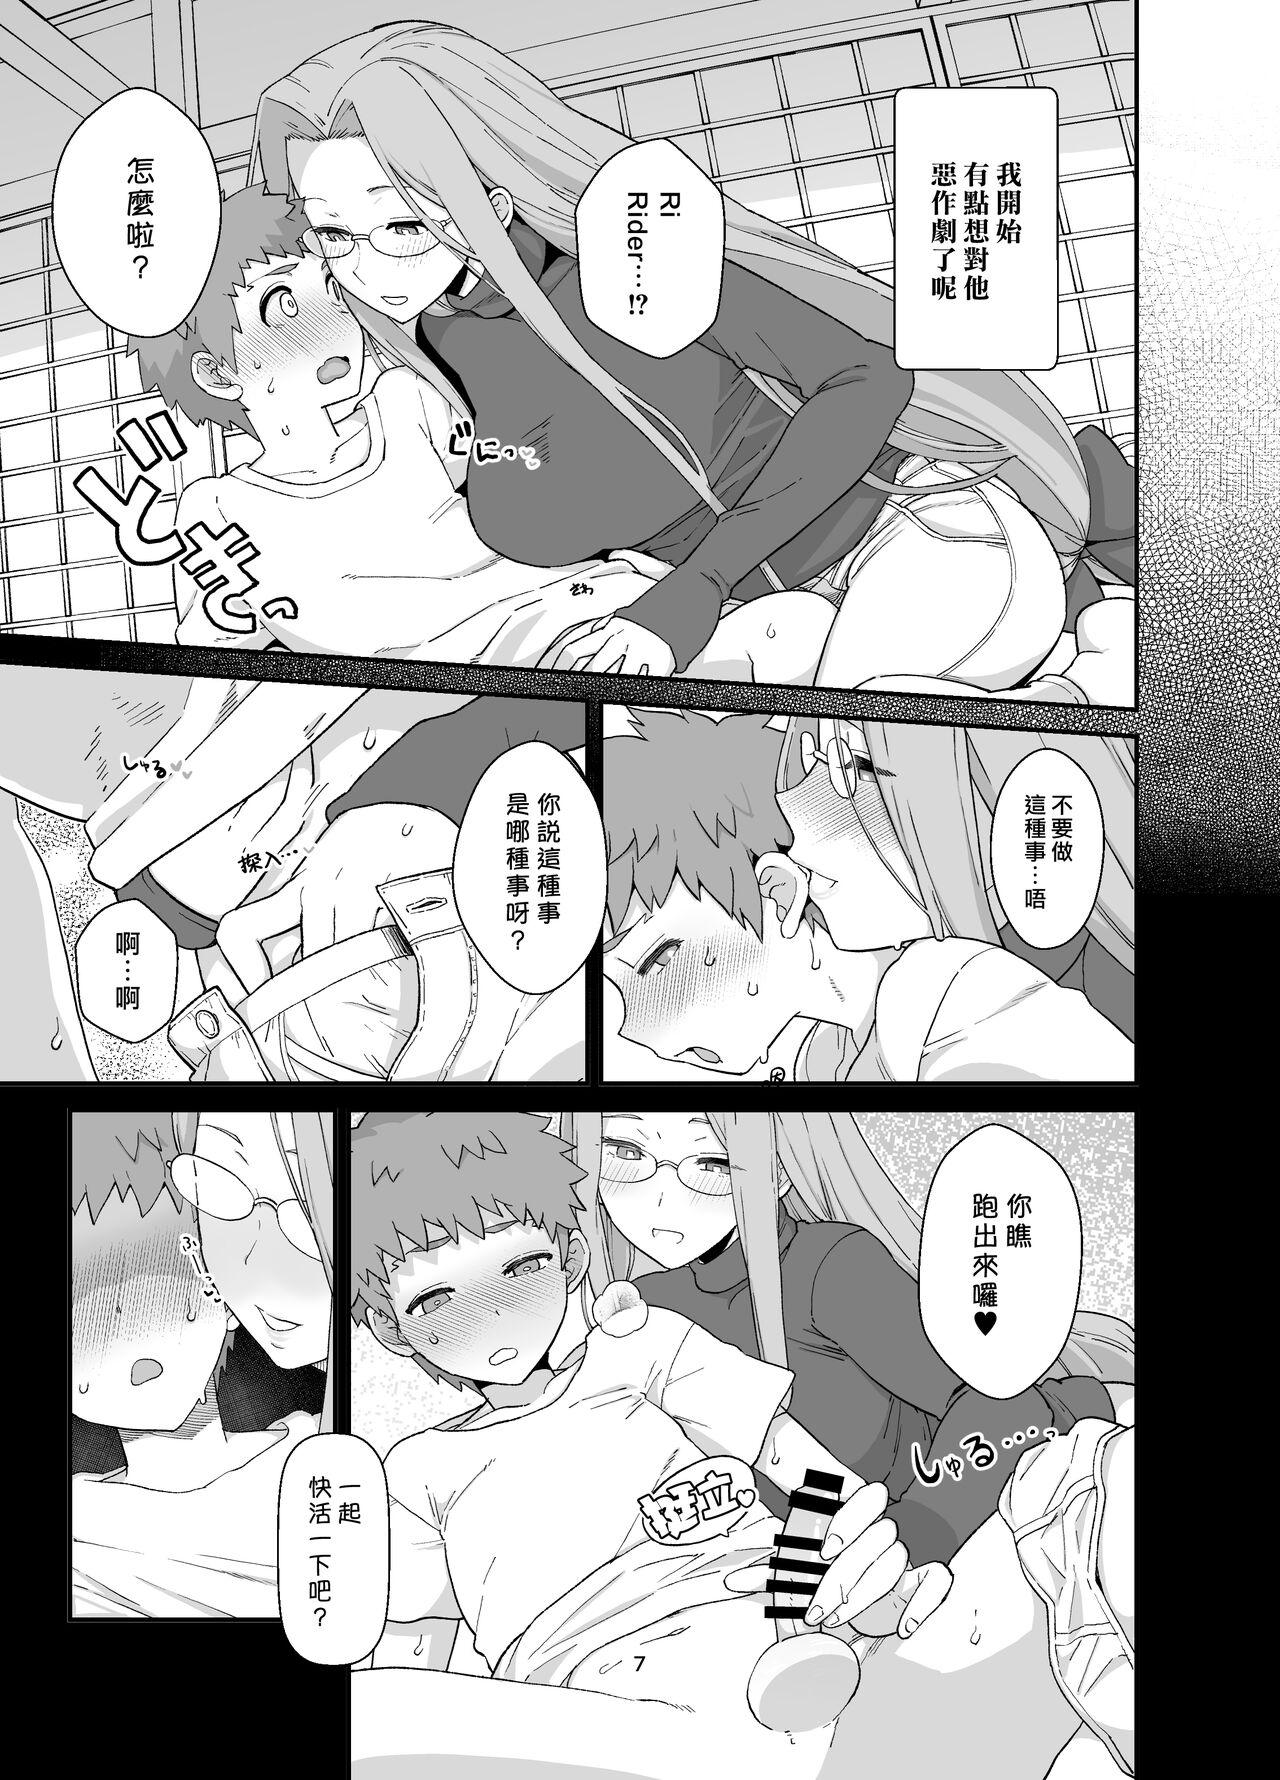 Dorm Rider-san to Orusuban - Fate stay night Hot Naked Girl - Page 10